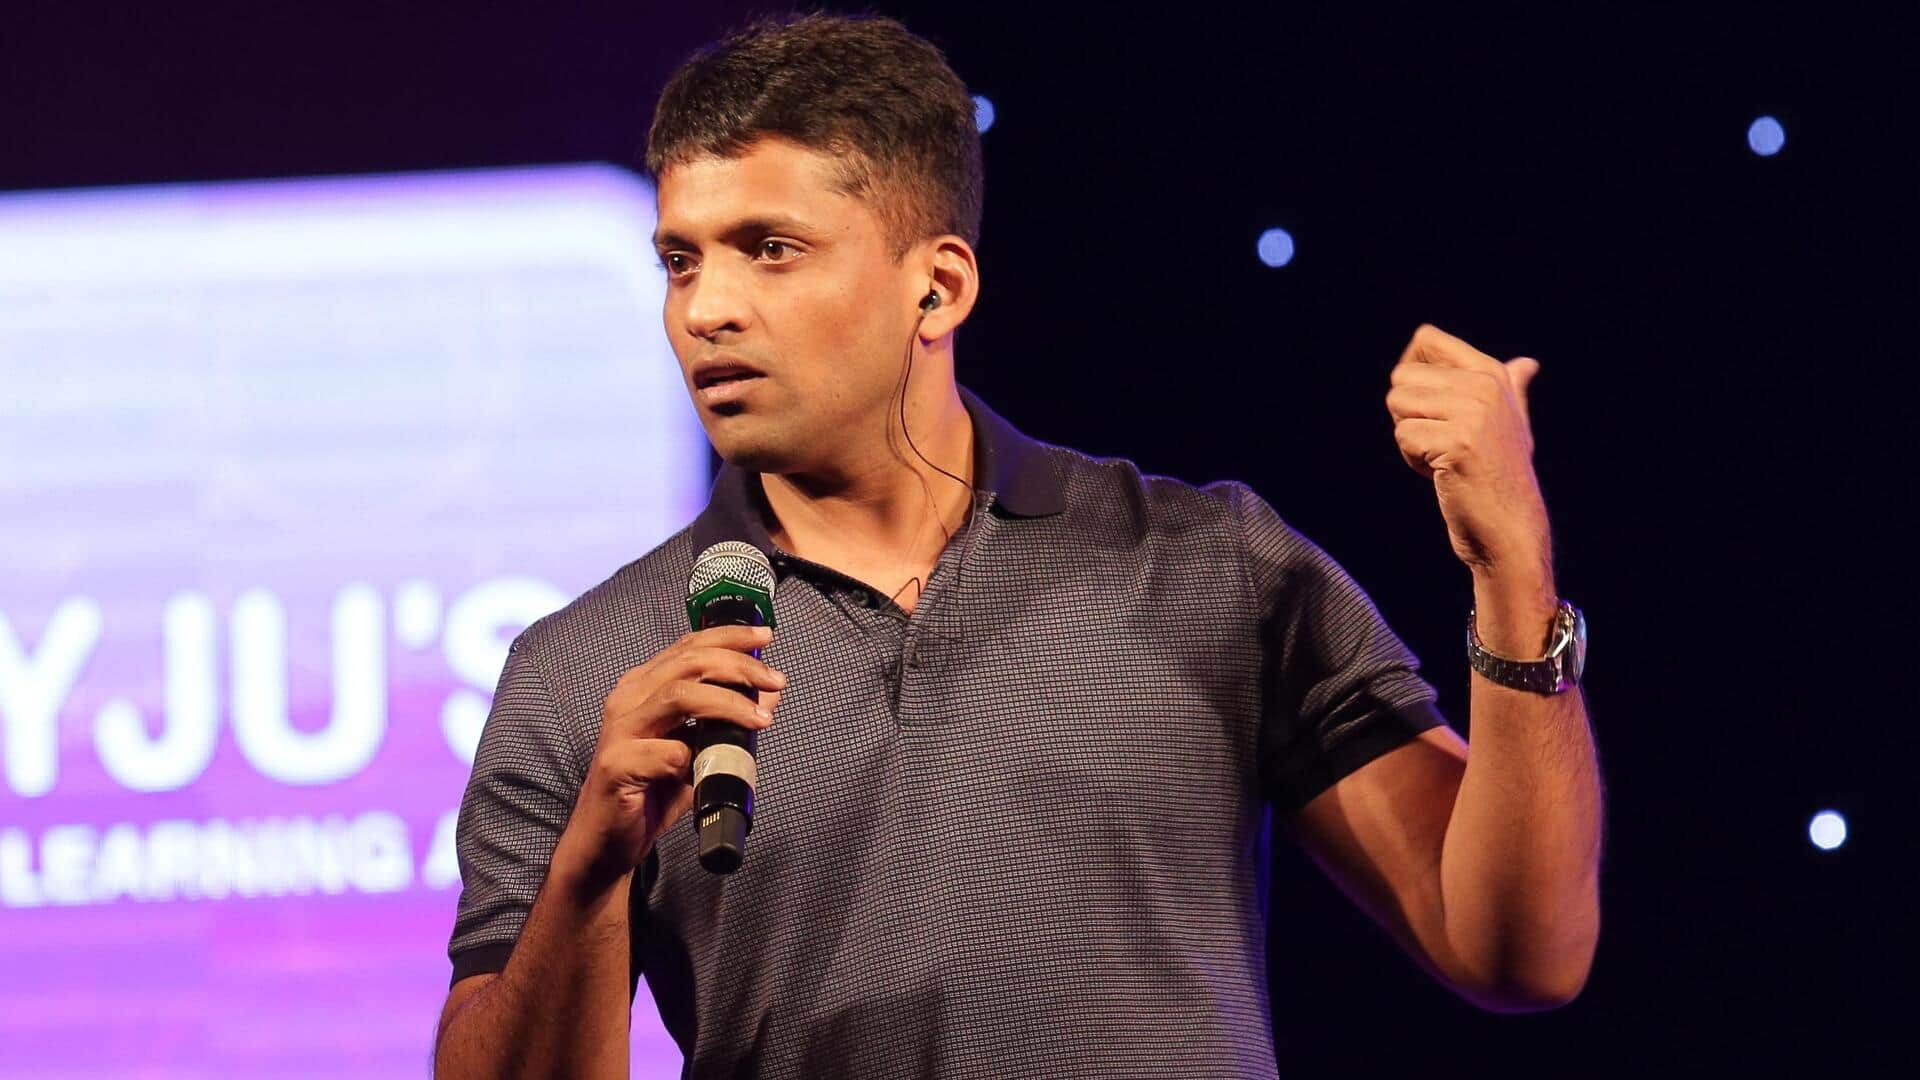 ED uncovers Rs. 9,000cr FEMA violation at BYJU'S, issues notice